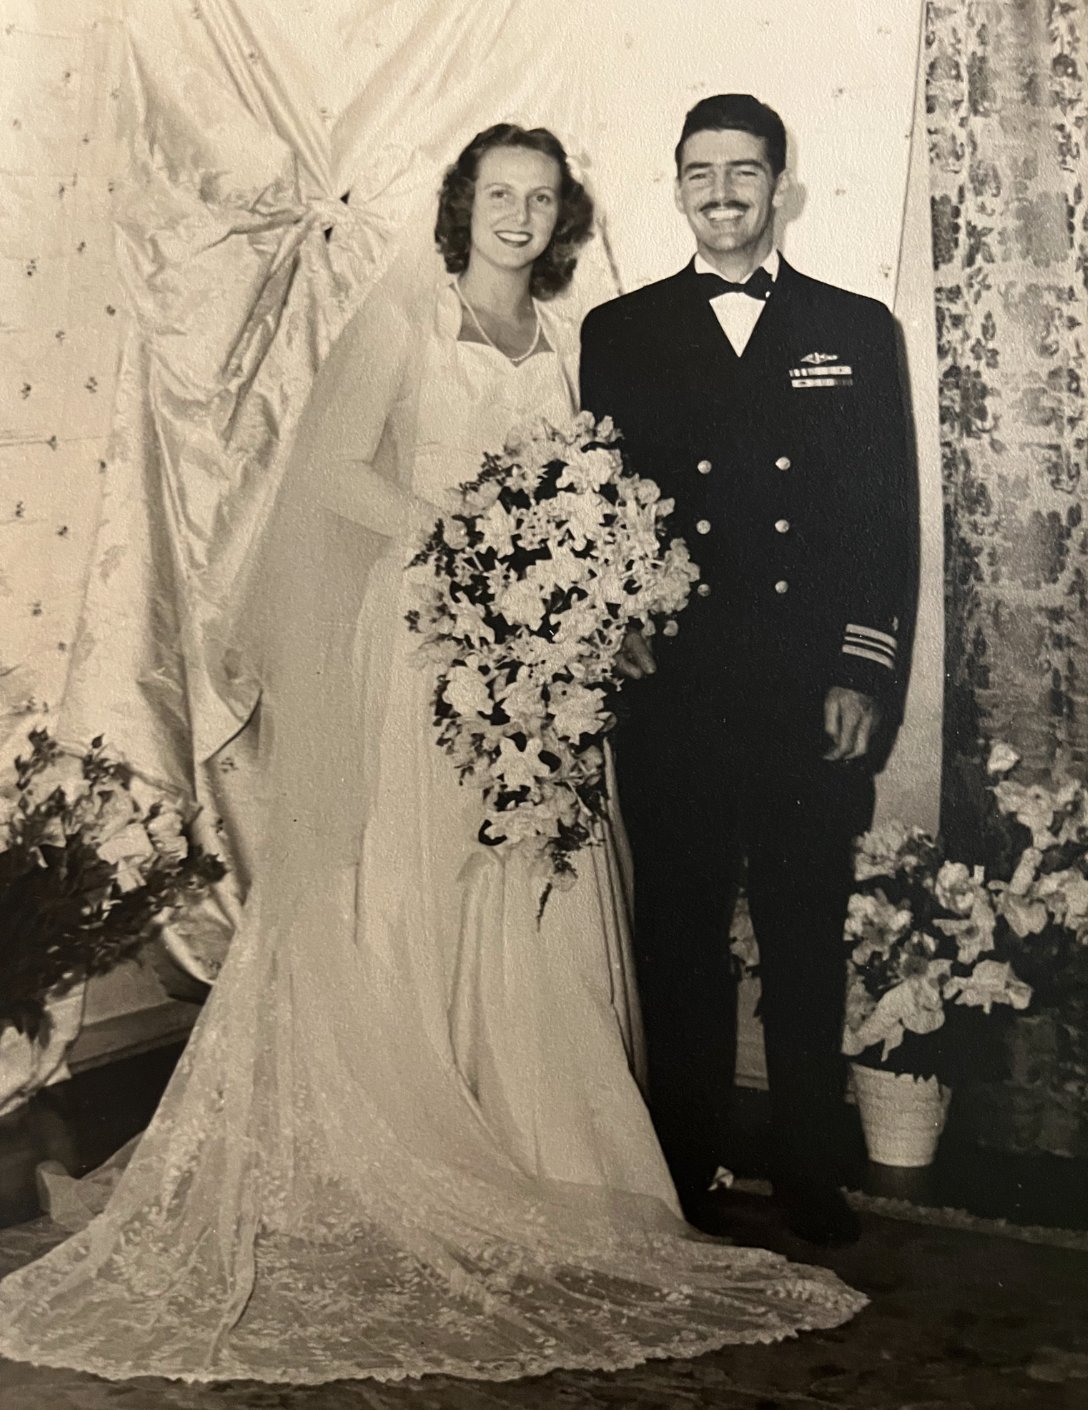 Commander and Mrs. John Walling at their wedding ceremony.